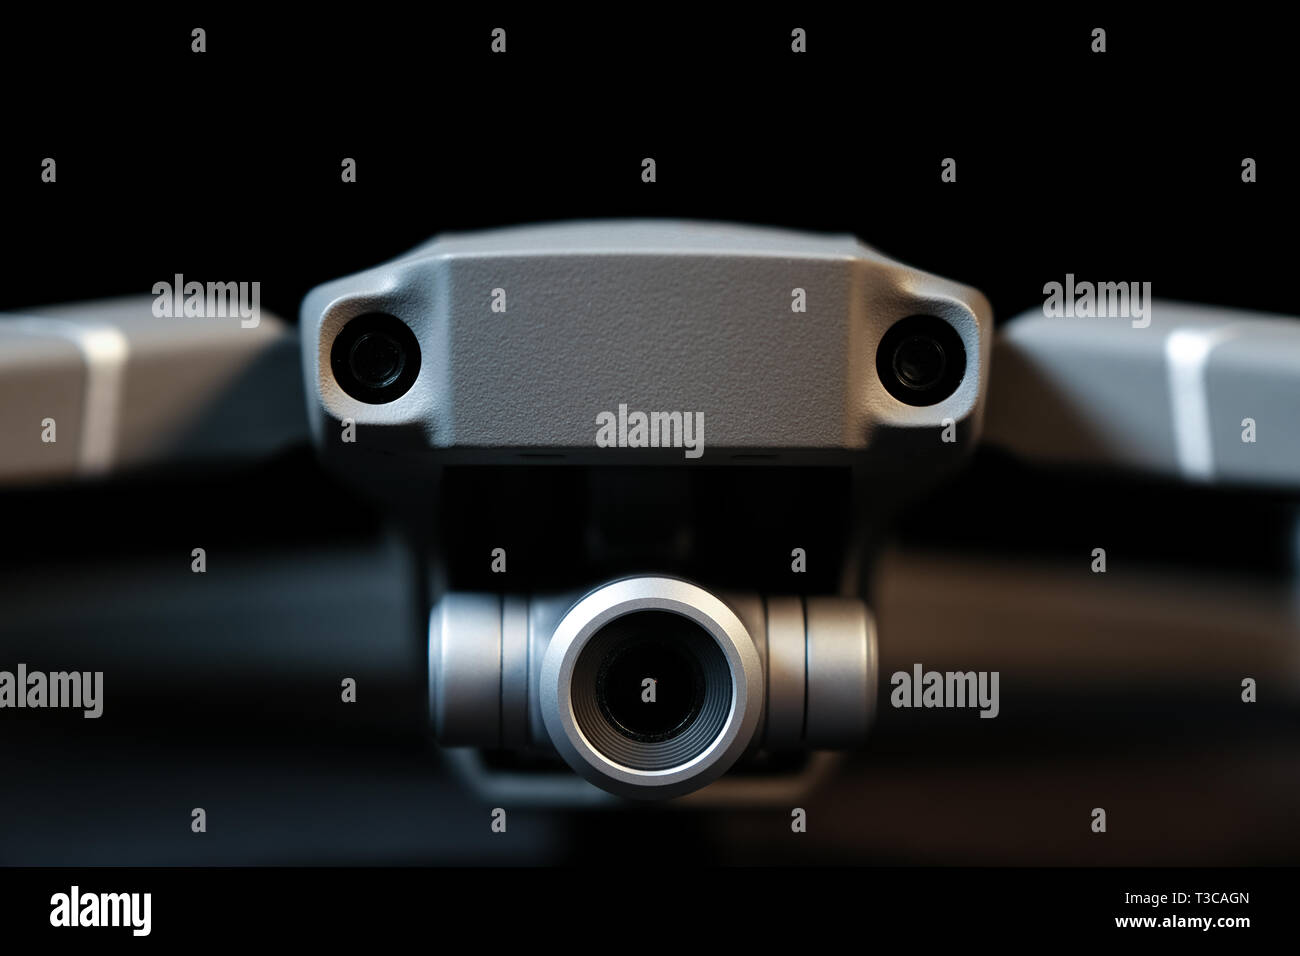 Close-up of the front of a DJI Mavic 2 Zoom drone showing the camera and  forward facing sensors. Studio shot with copy space Stock Photo - Alamy